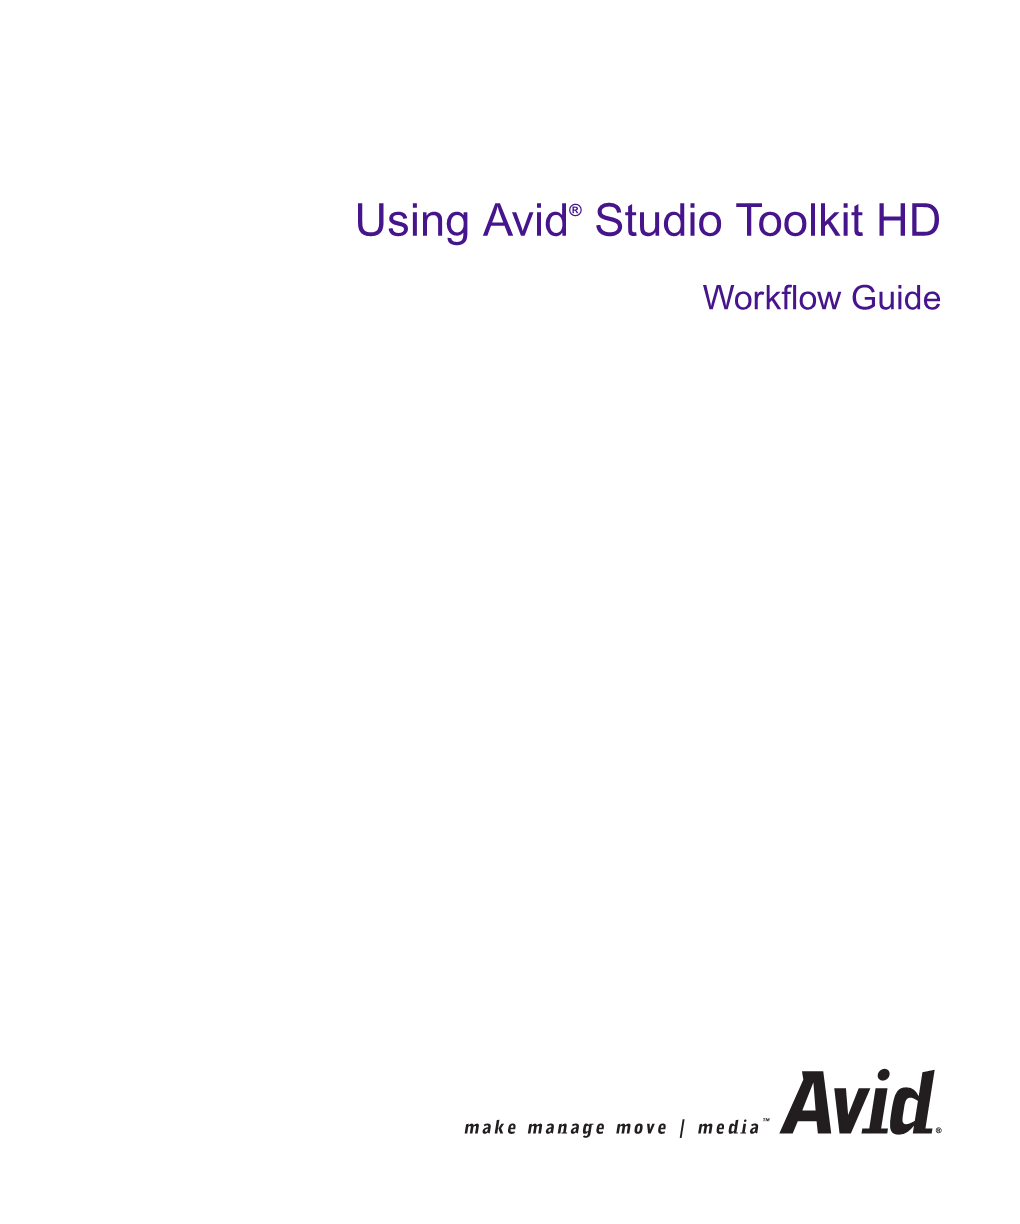 Using Avid Studio Toolkit HD Workflow Guide • Part 0130-06907-01 • March 2005